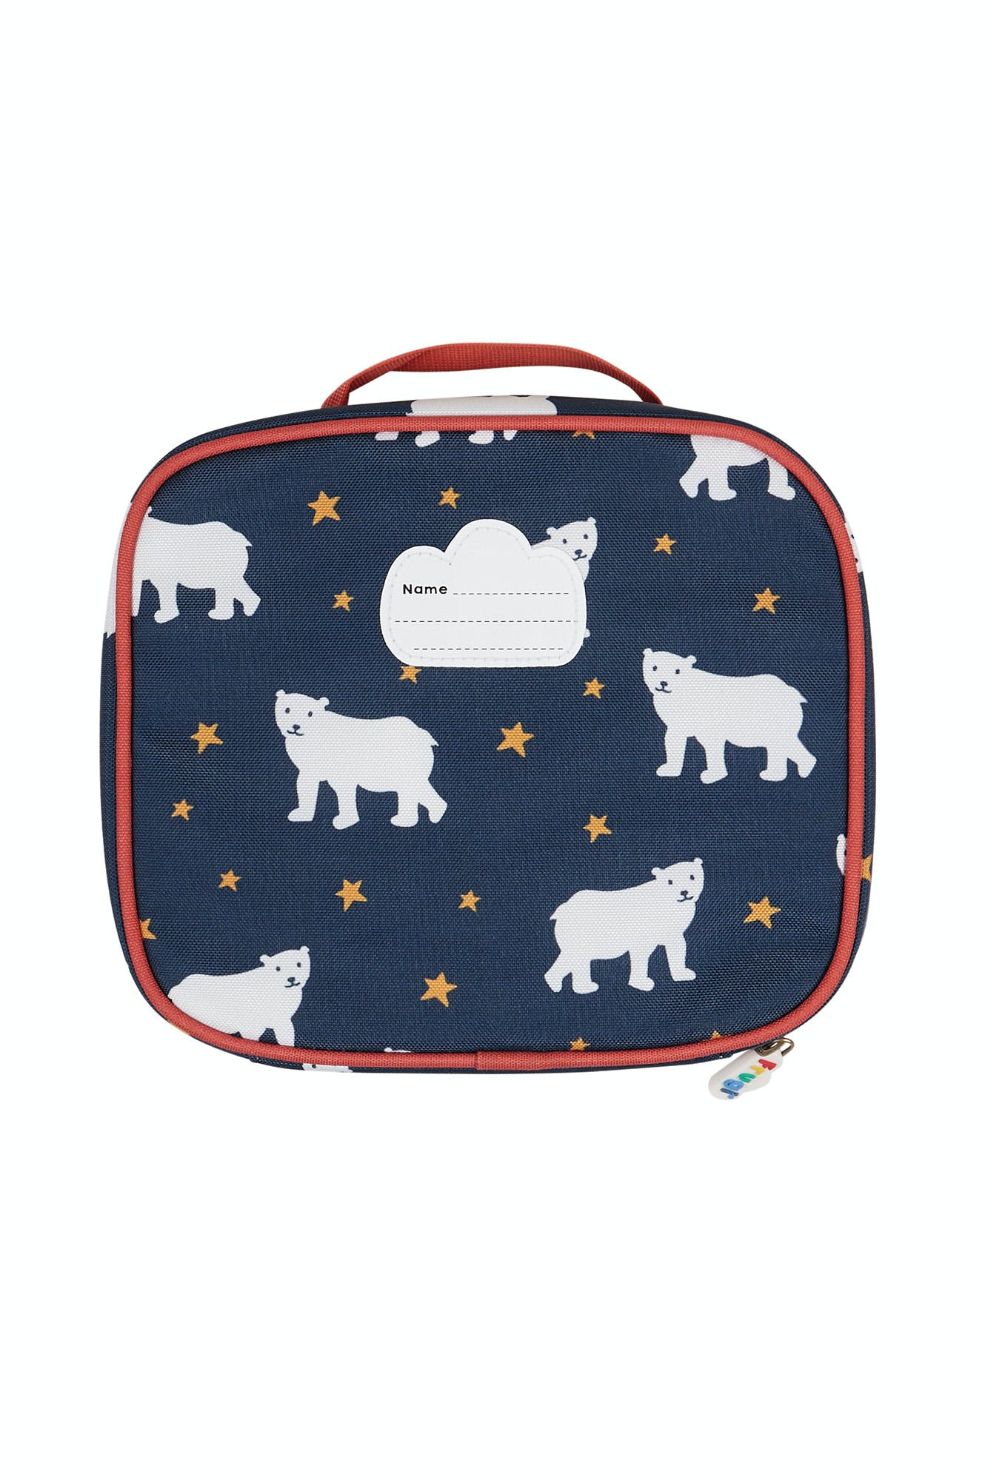 Frugi Pack A Snack Insulated Lunch Bag, Polar Bears